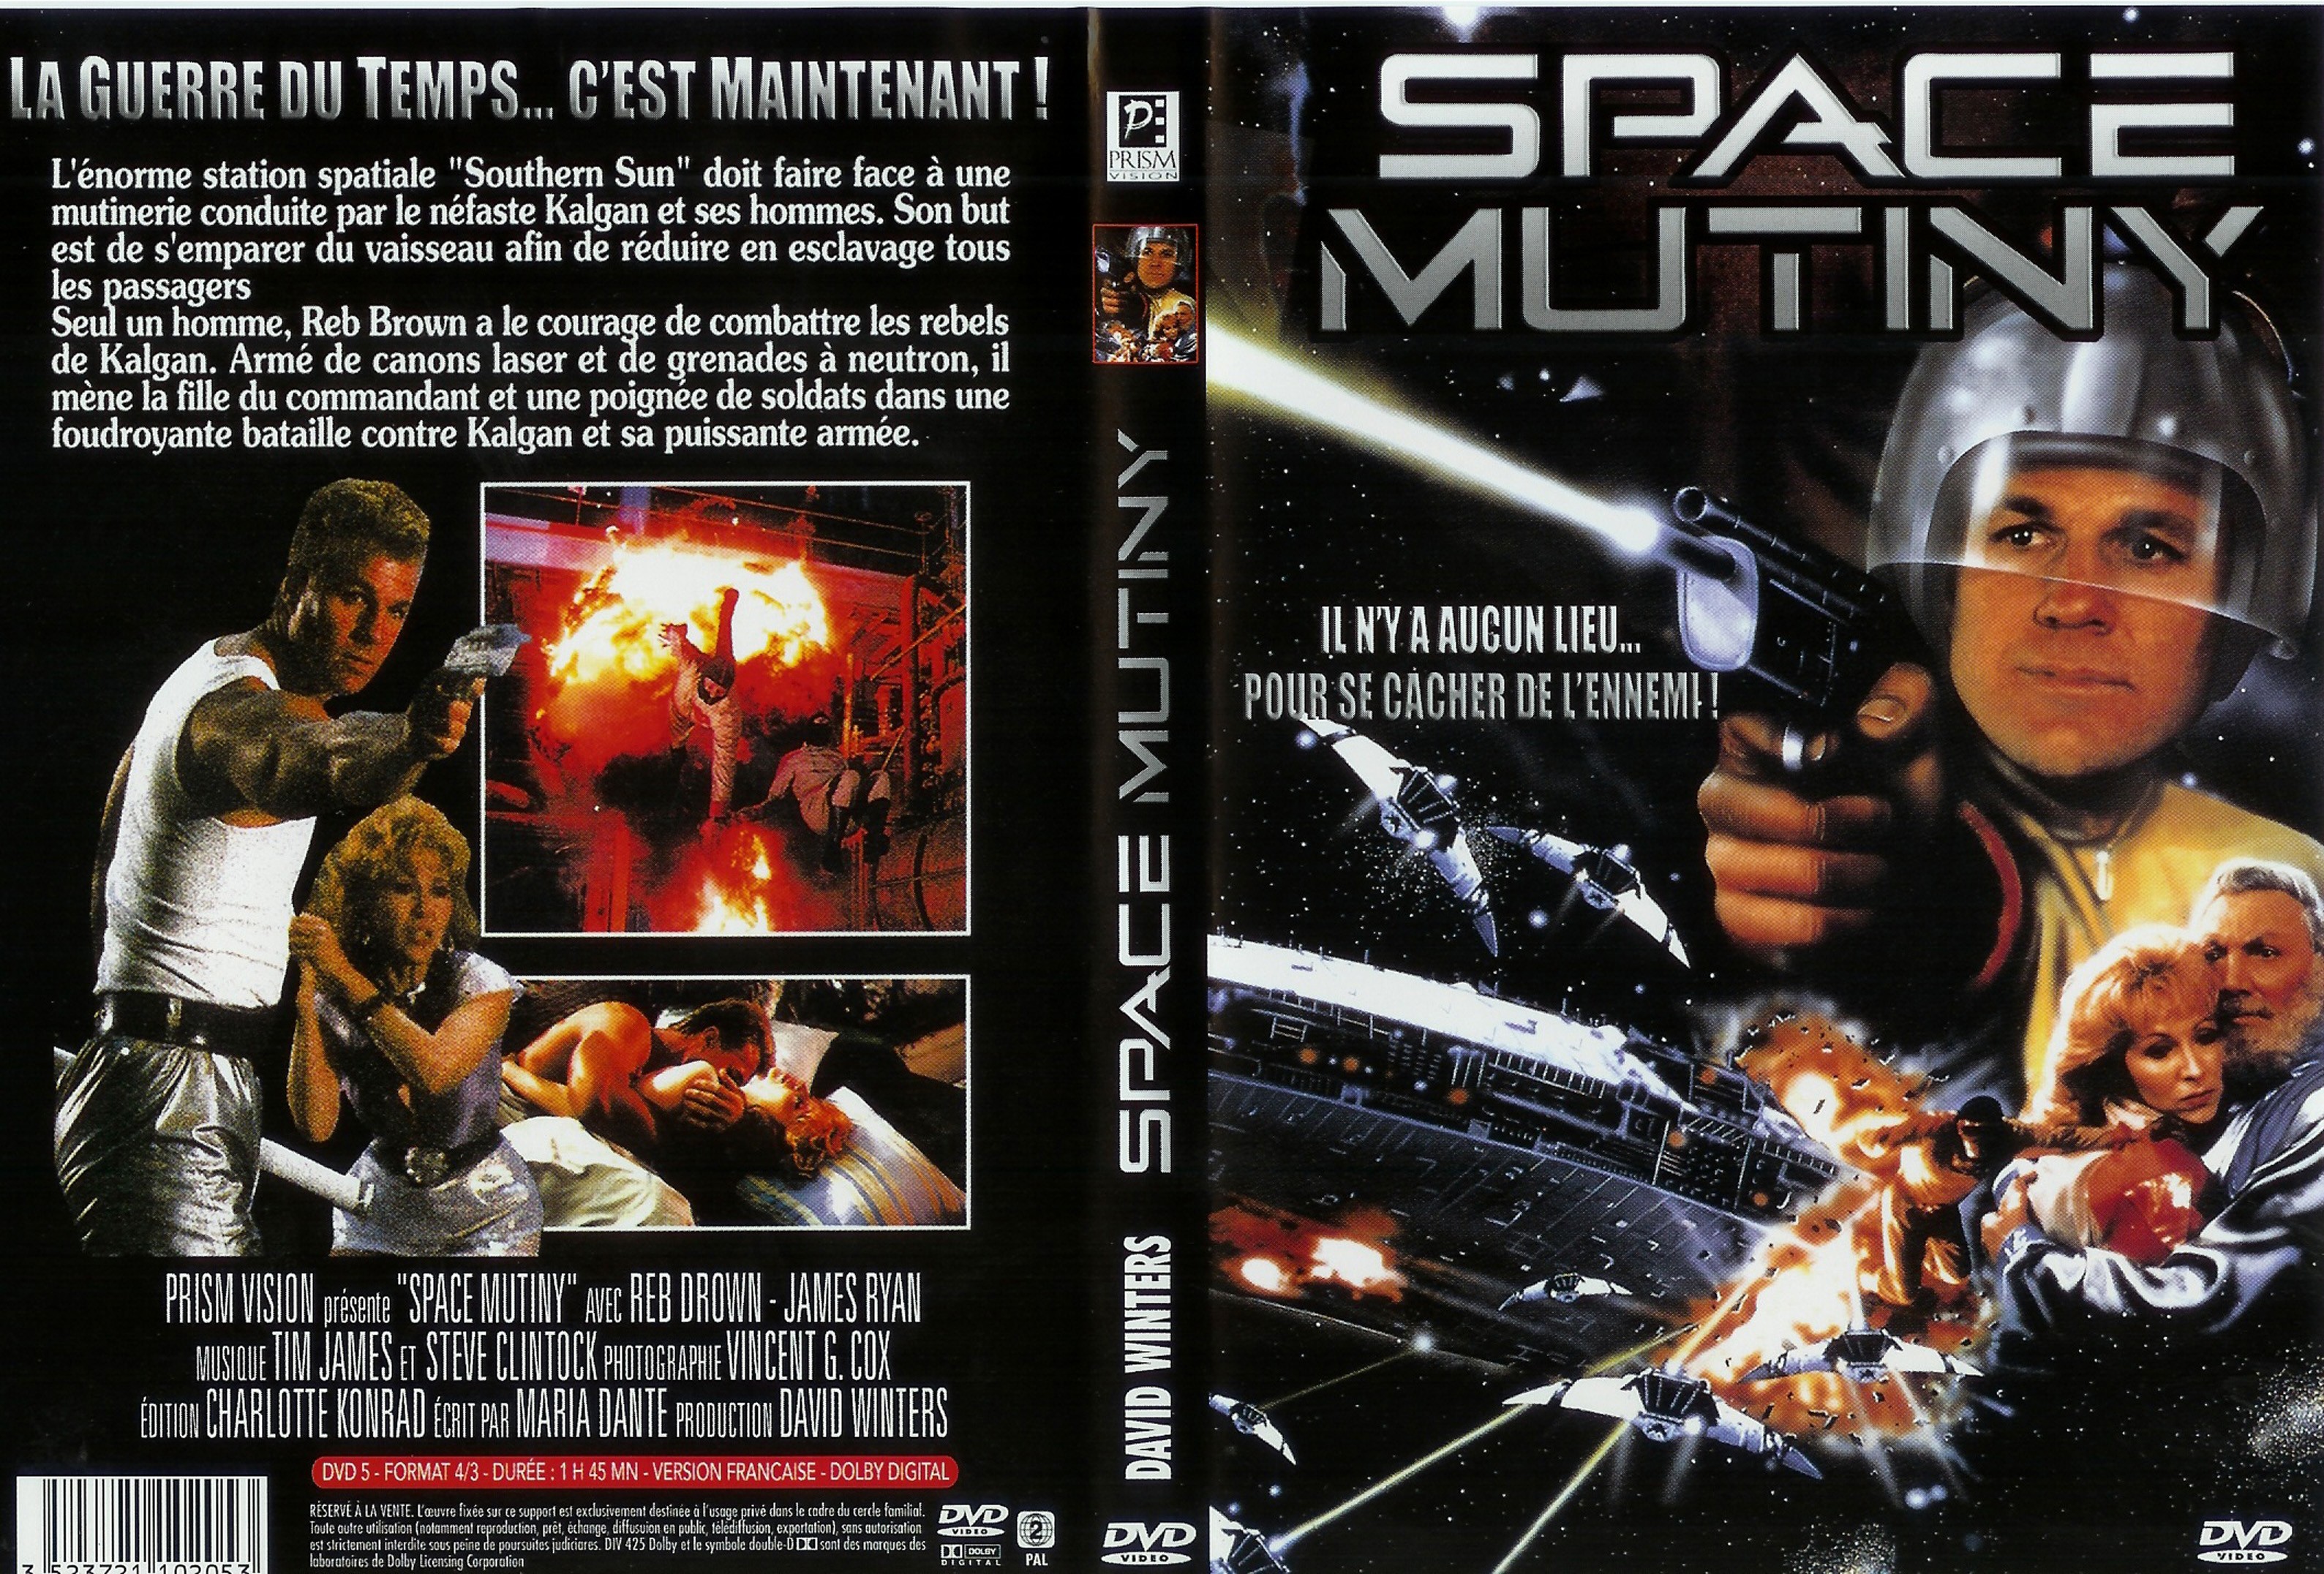 Jaquette DVD Space mutiny